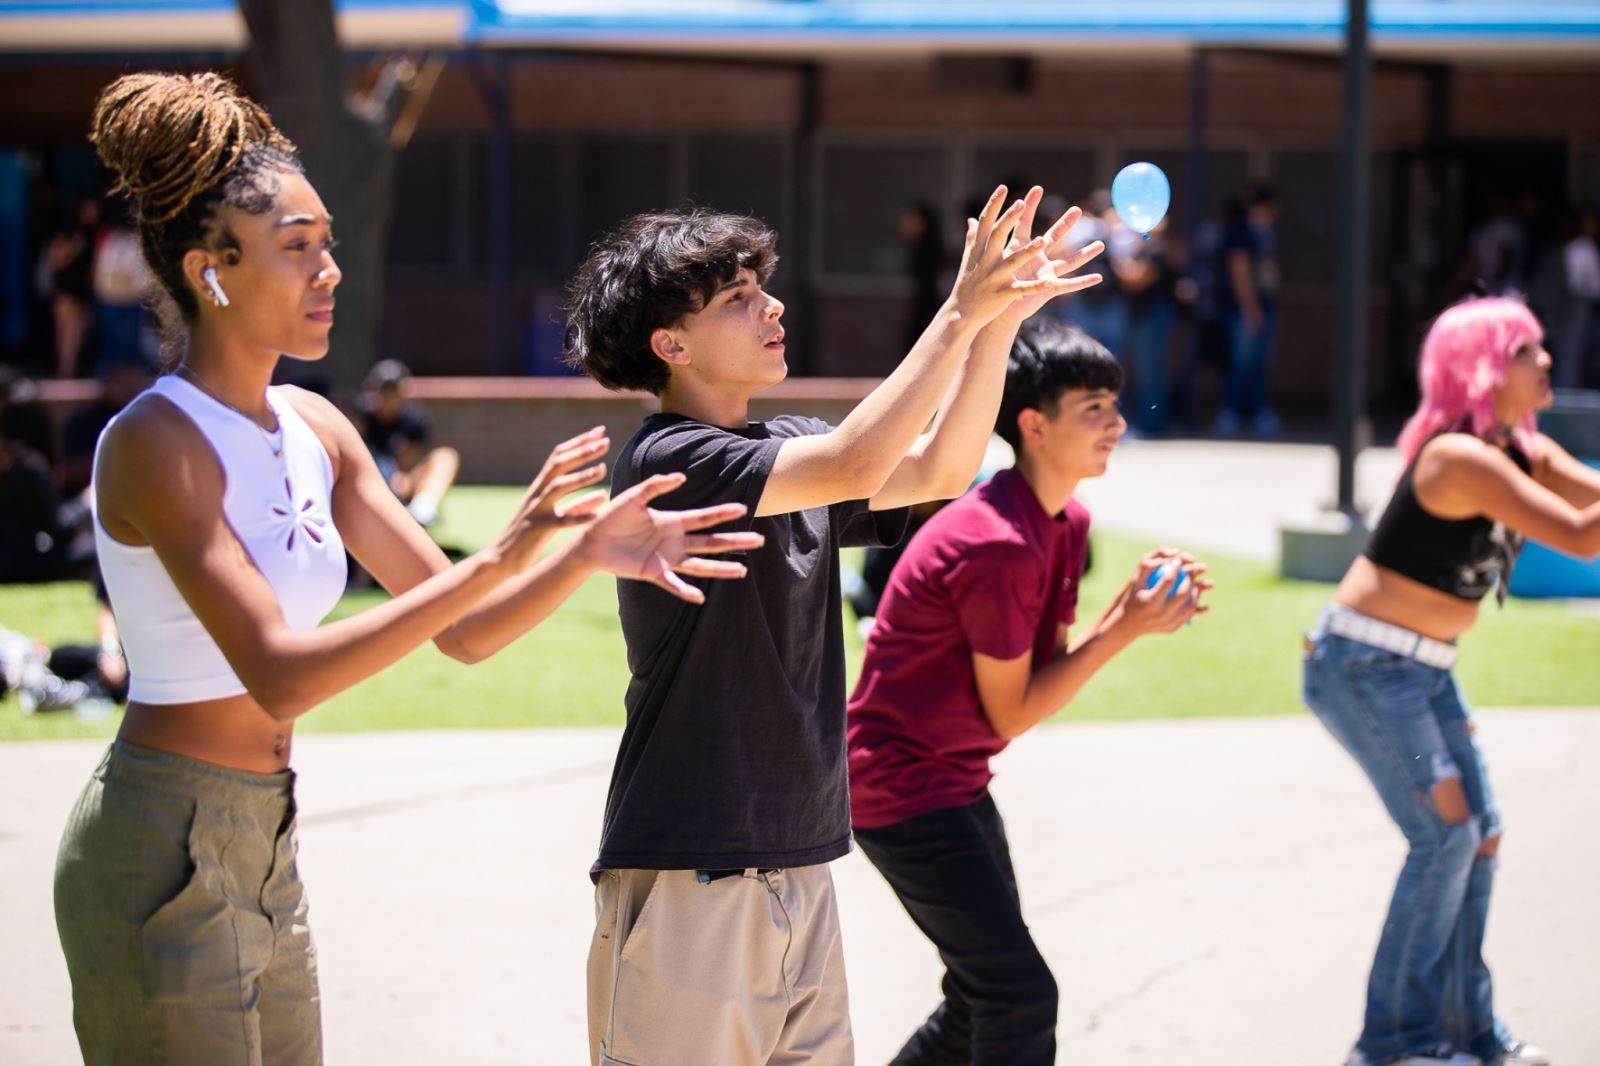 Pueblo High School students play with water balloons on the first day.